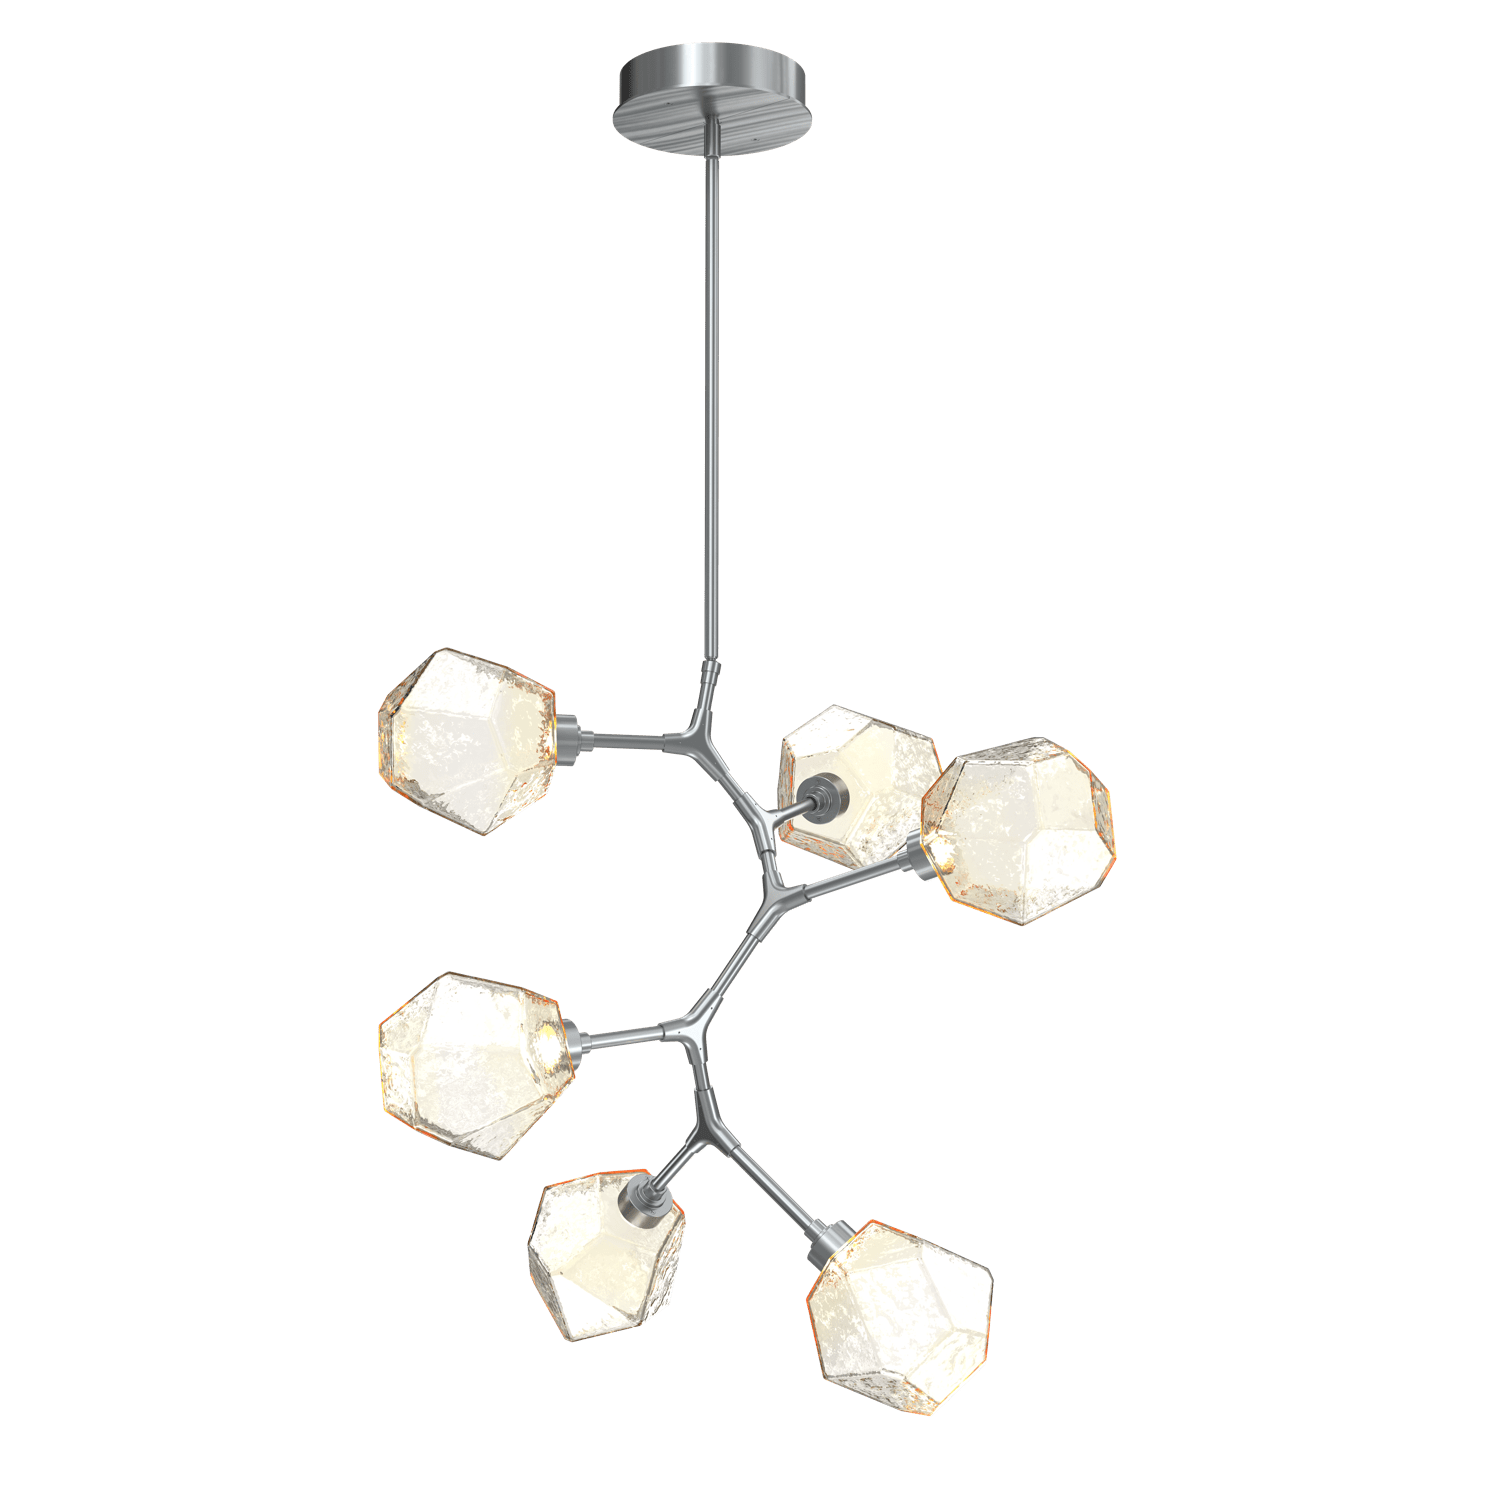 CHB0039-VA-SN-A-Hammerton-Studio-Gem-6-light-modern-vine-chandelier-with-satin-nickel-finish-and-amber-blown-glass-shades-and-LED-lamping